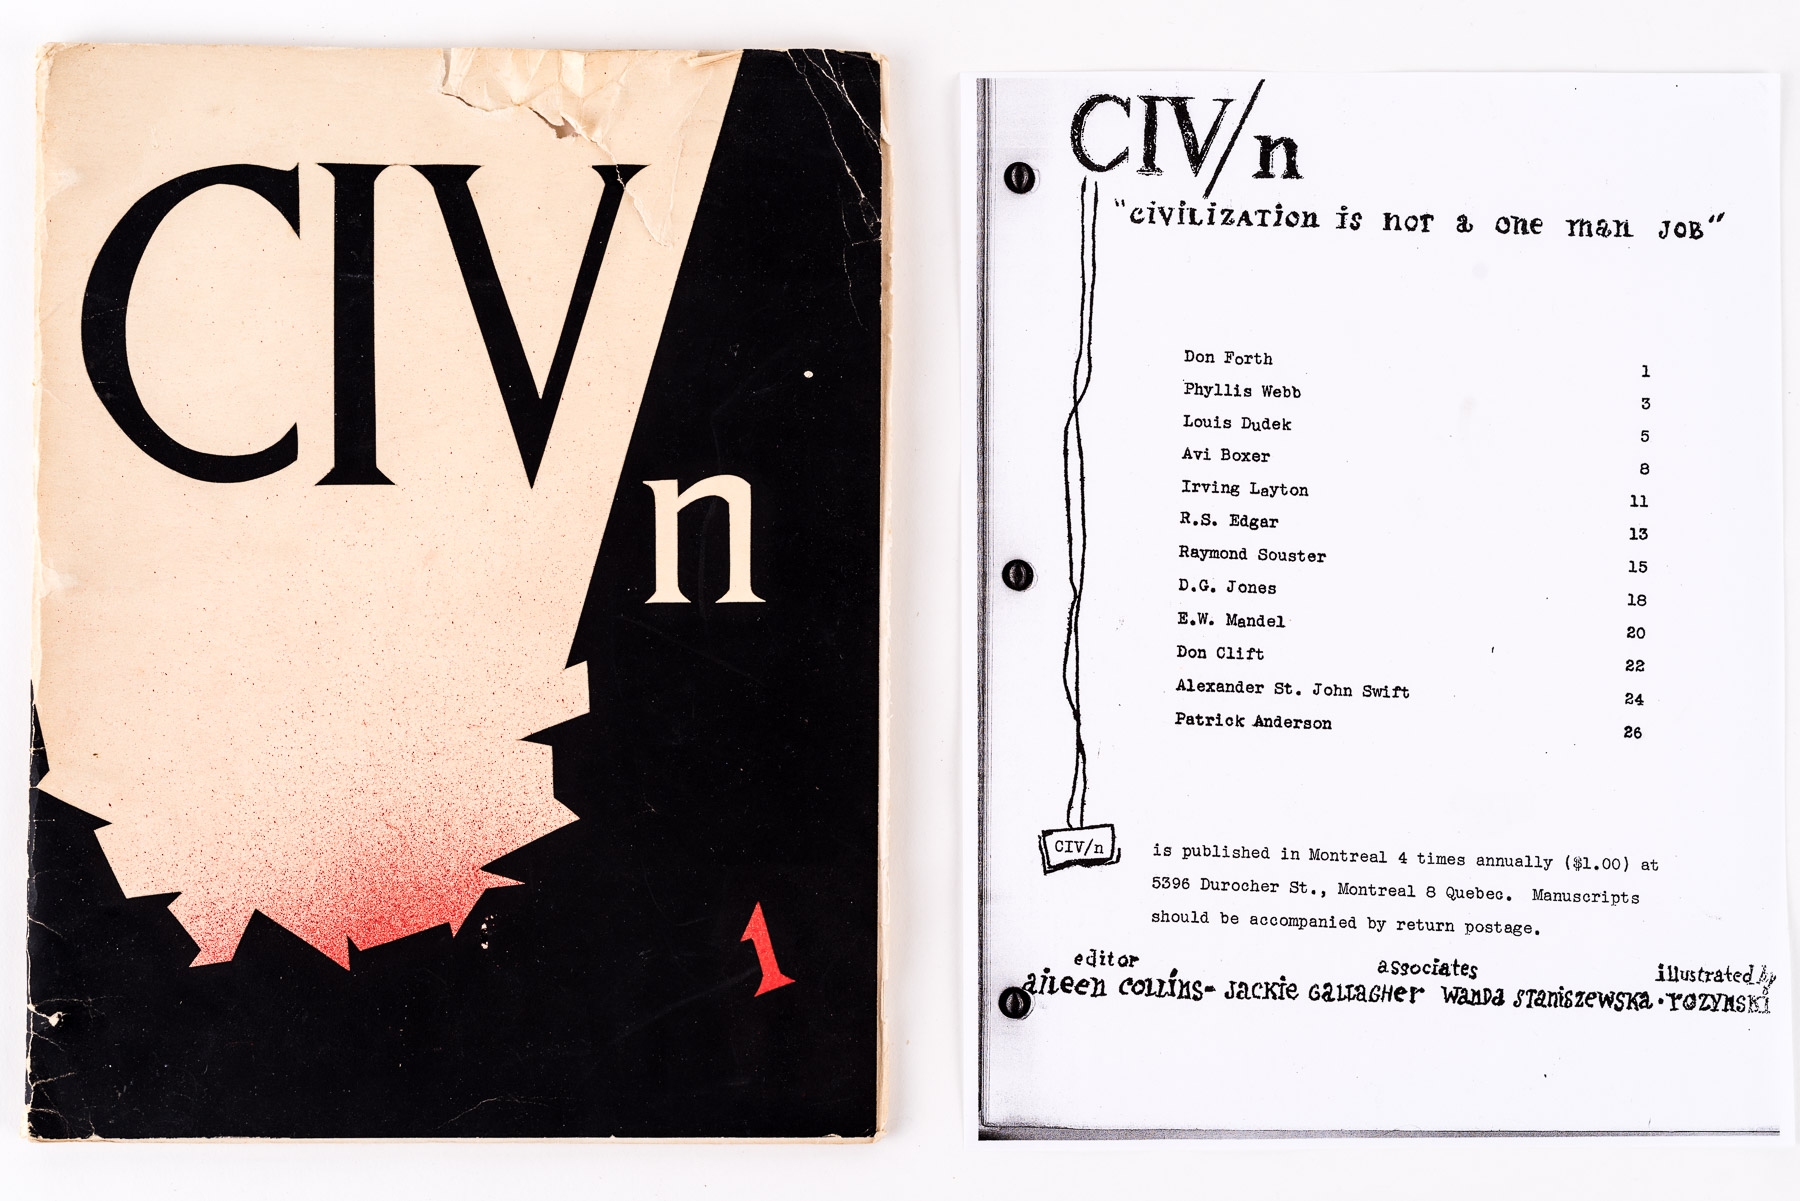 CIV/n #1 published in 1953